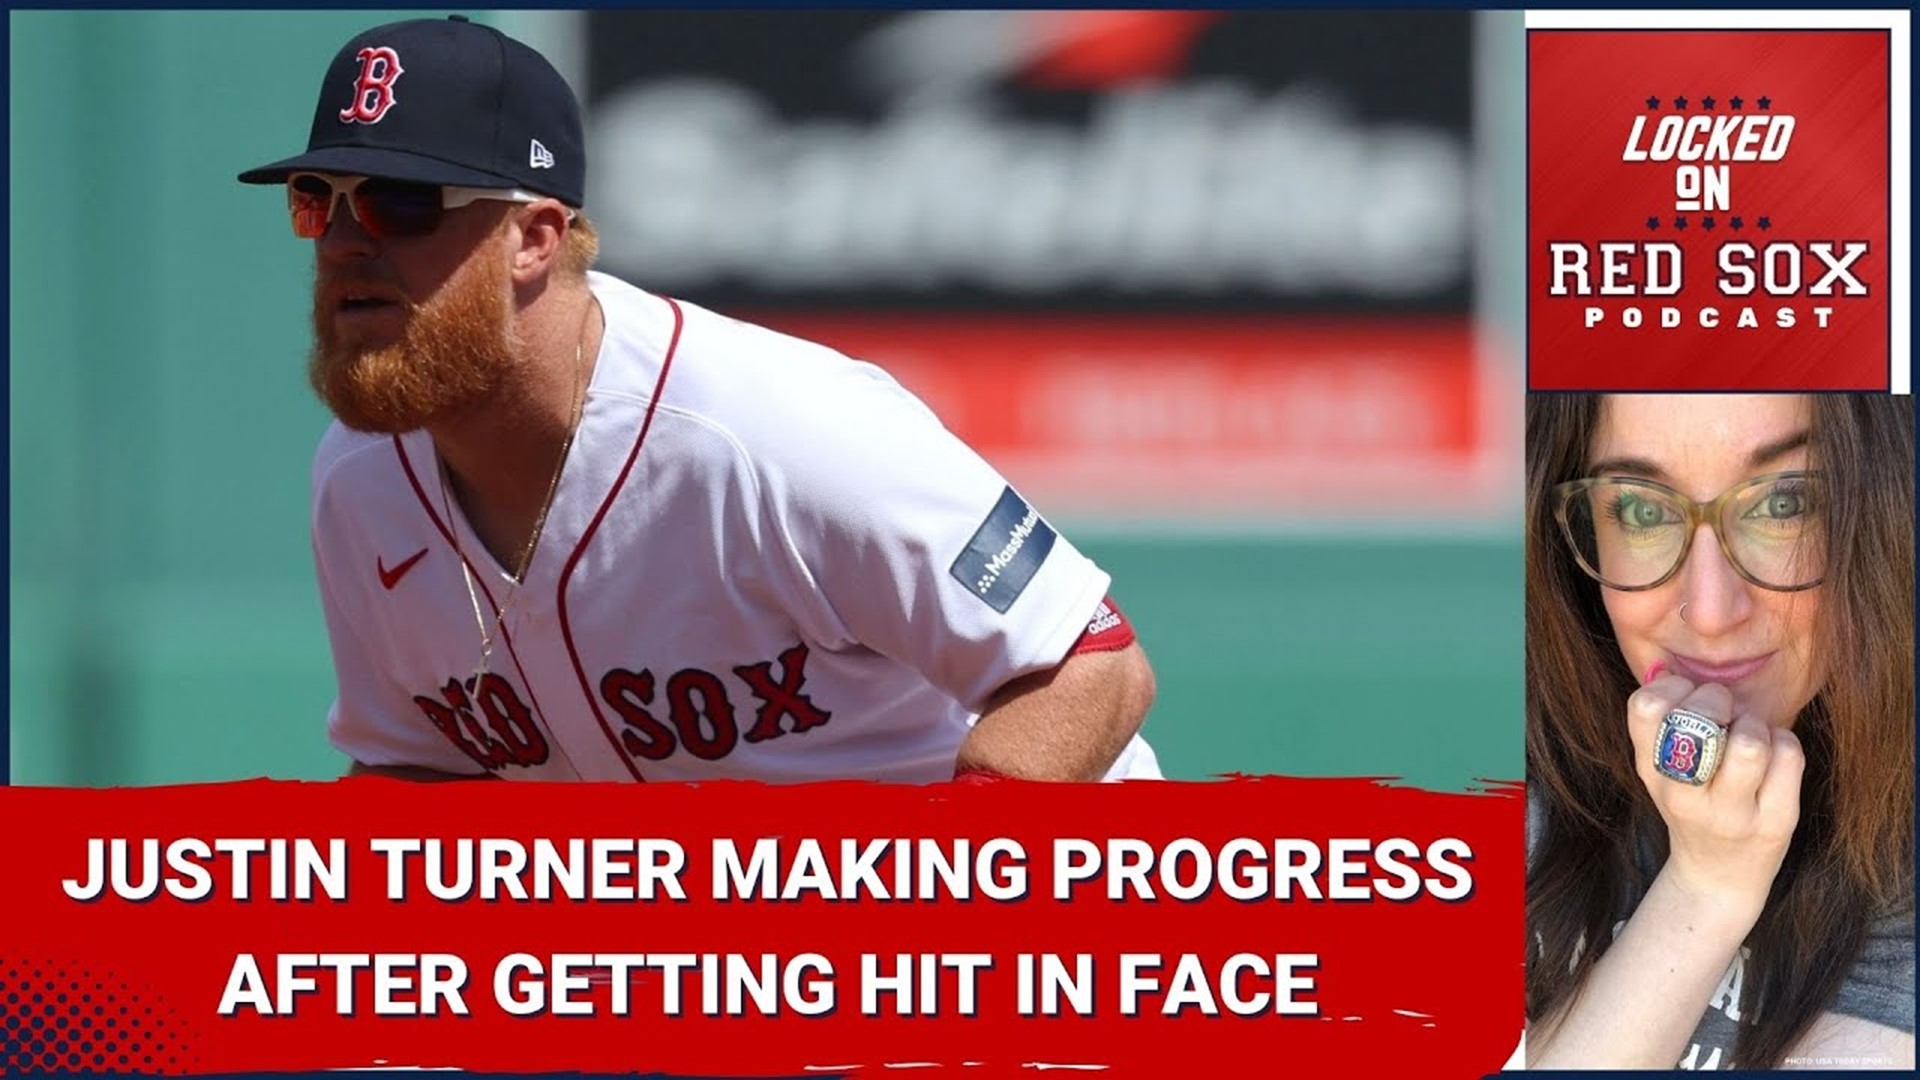 All good things must come to an end like the Boston Red Sox's undefeated spring training streak. This and more on Locked On Red Sox.